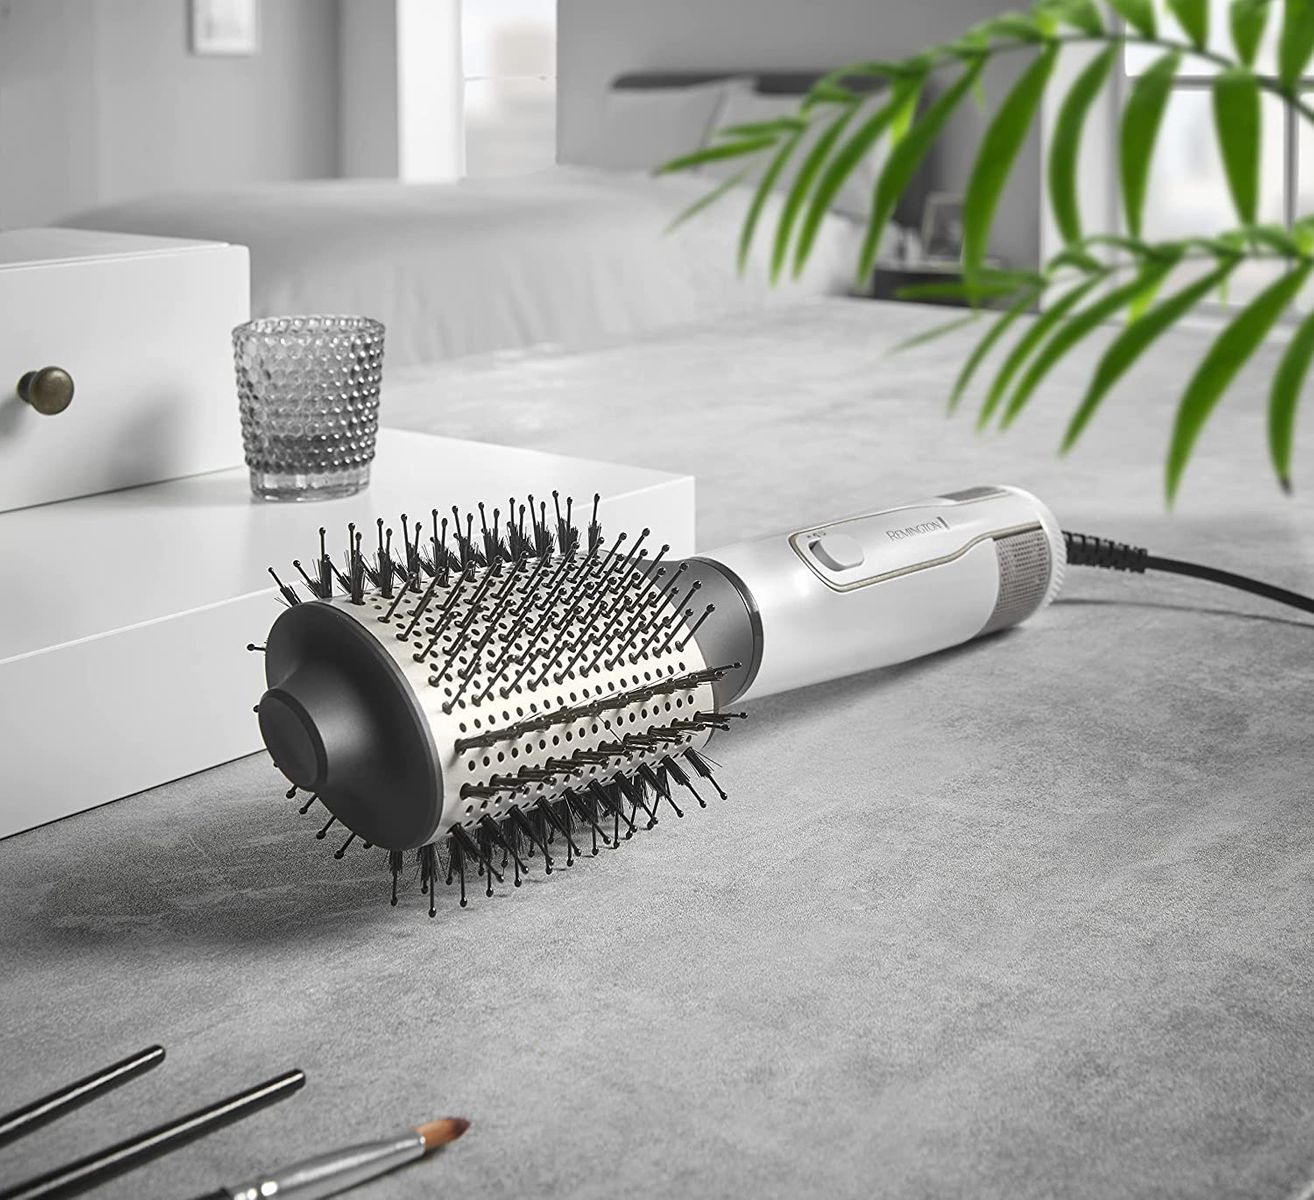 Remington Warm Air Brush Ion Hydraluxe 2in1: Hair Dryer & Volume Brush AS8901